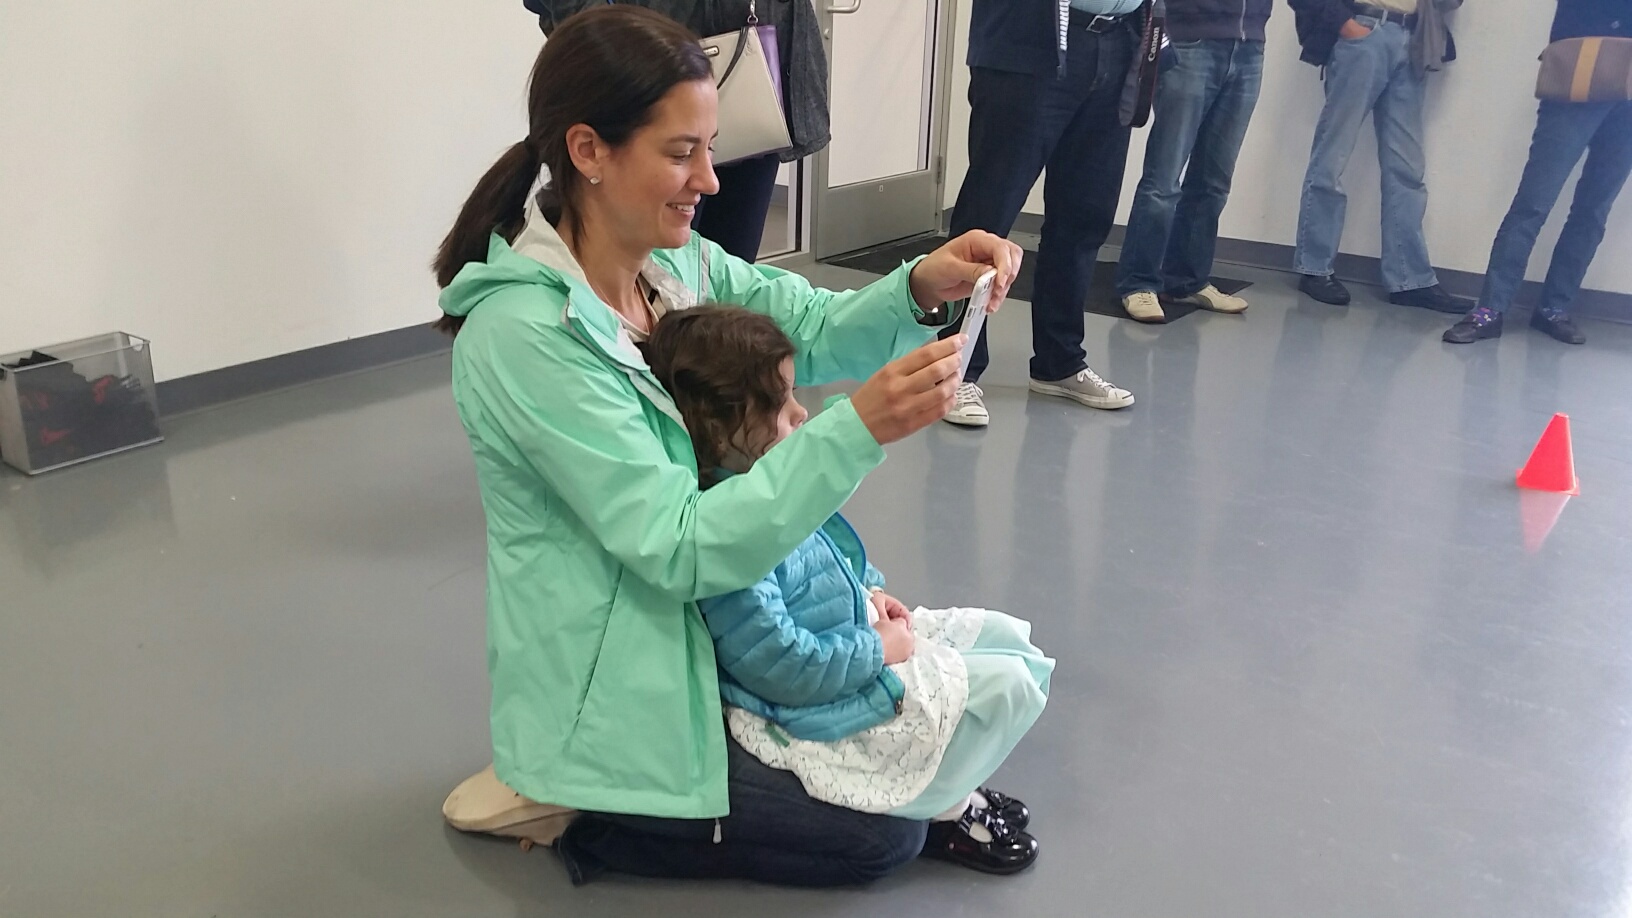 Donna McNamara takes pictures of her daughter Lila McNamara as she test drives a Tesla car for kids Sunday, May 22, 2106 at Tesla Motors Tyco Road in Vienna, Va. Her daughter, Avery McNamara, 4, is sitting in her lap waiting for her turn to test out the Tesla. (WTOP/Kathy Stewart)